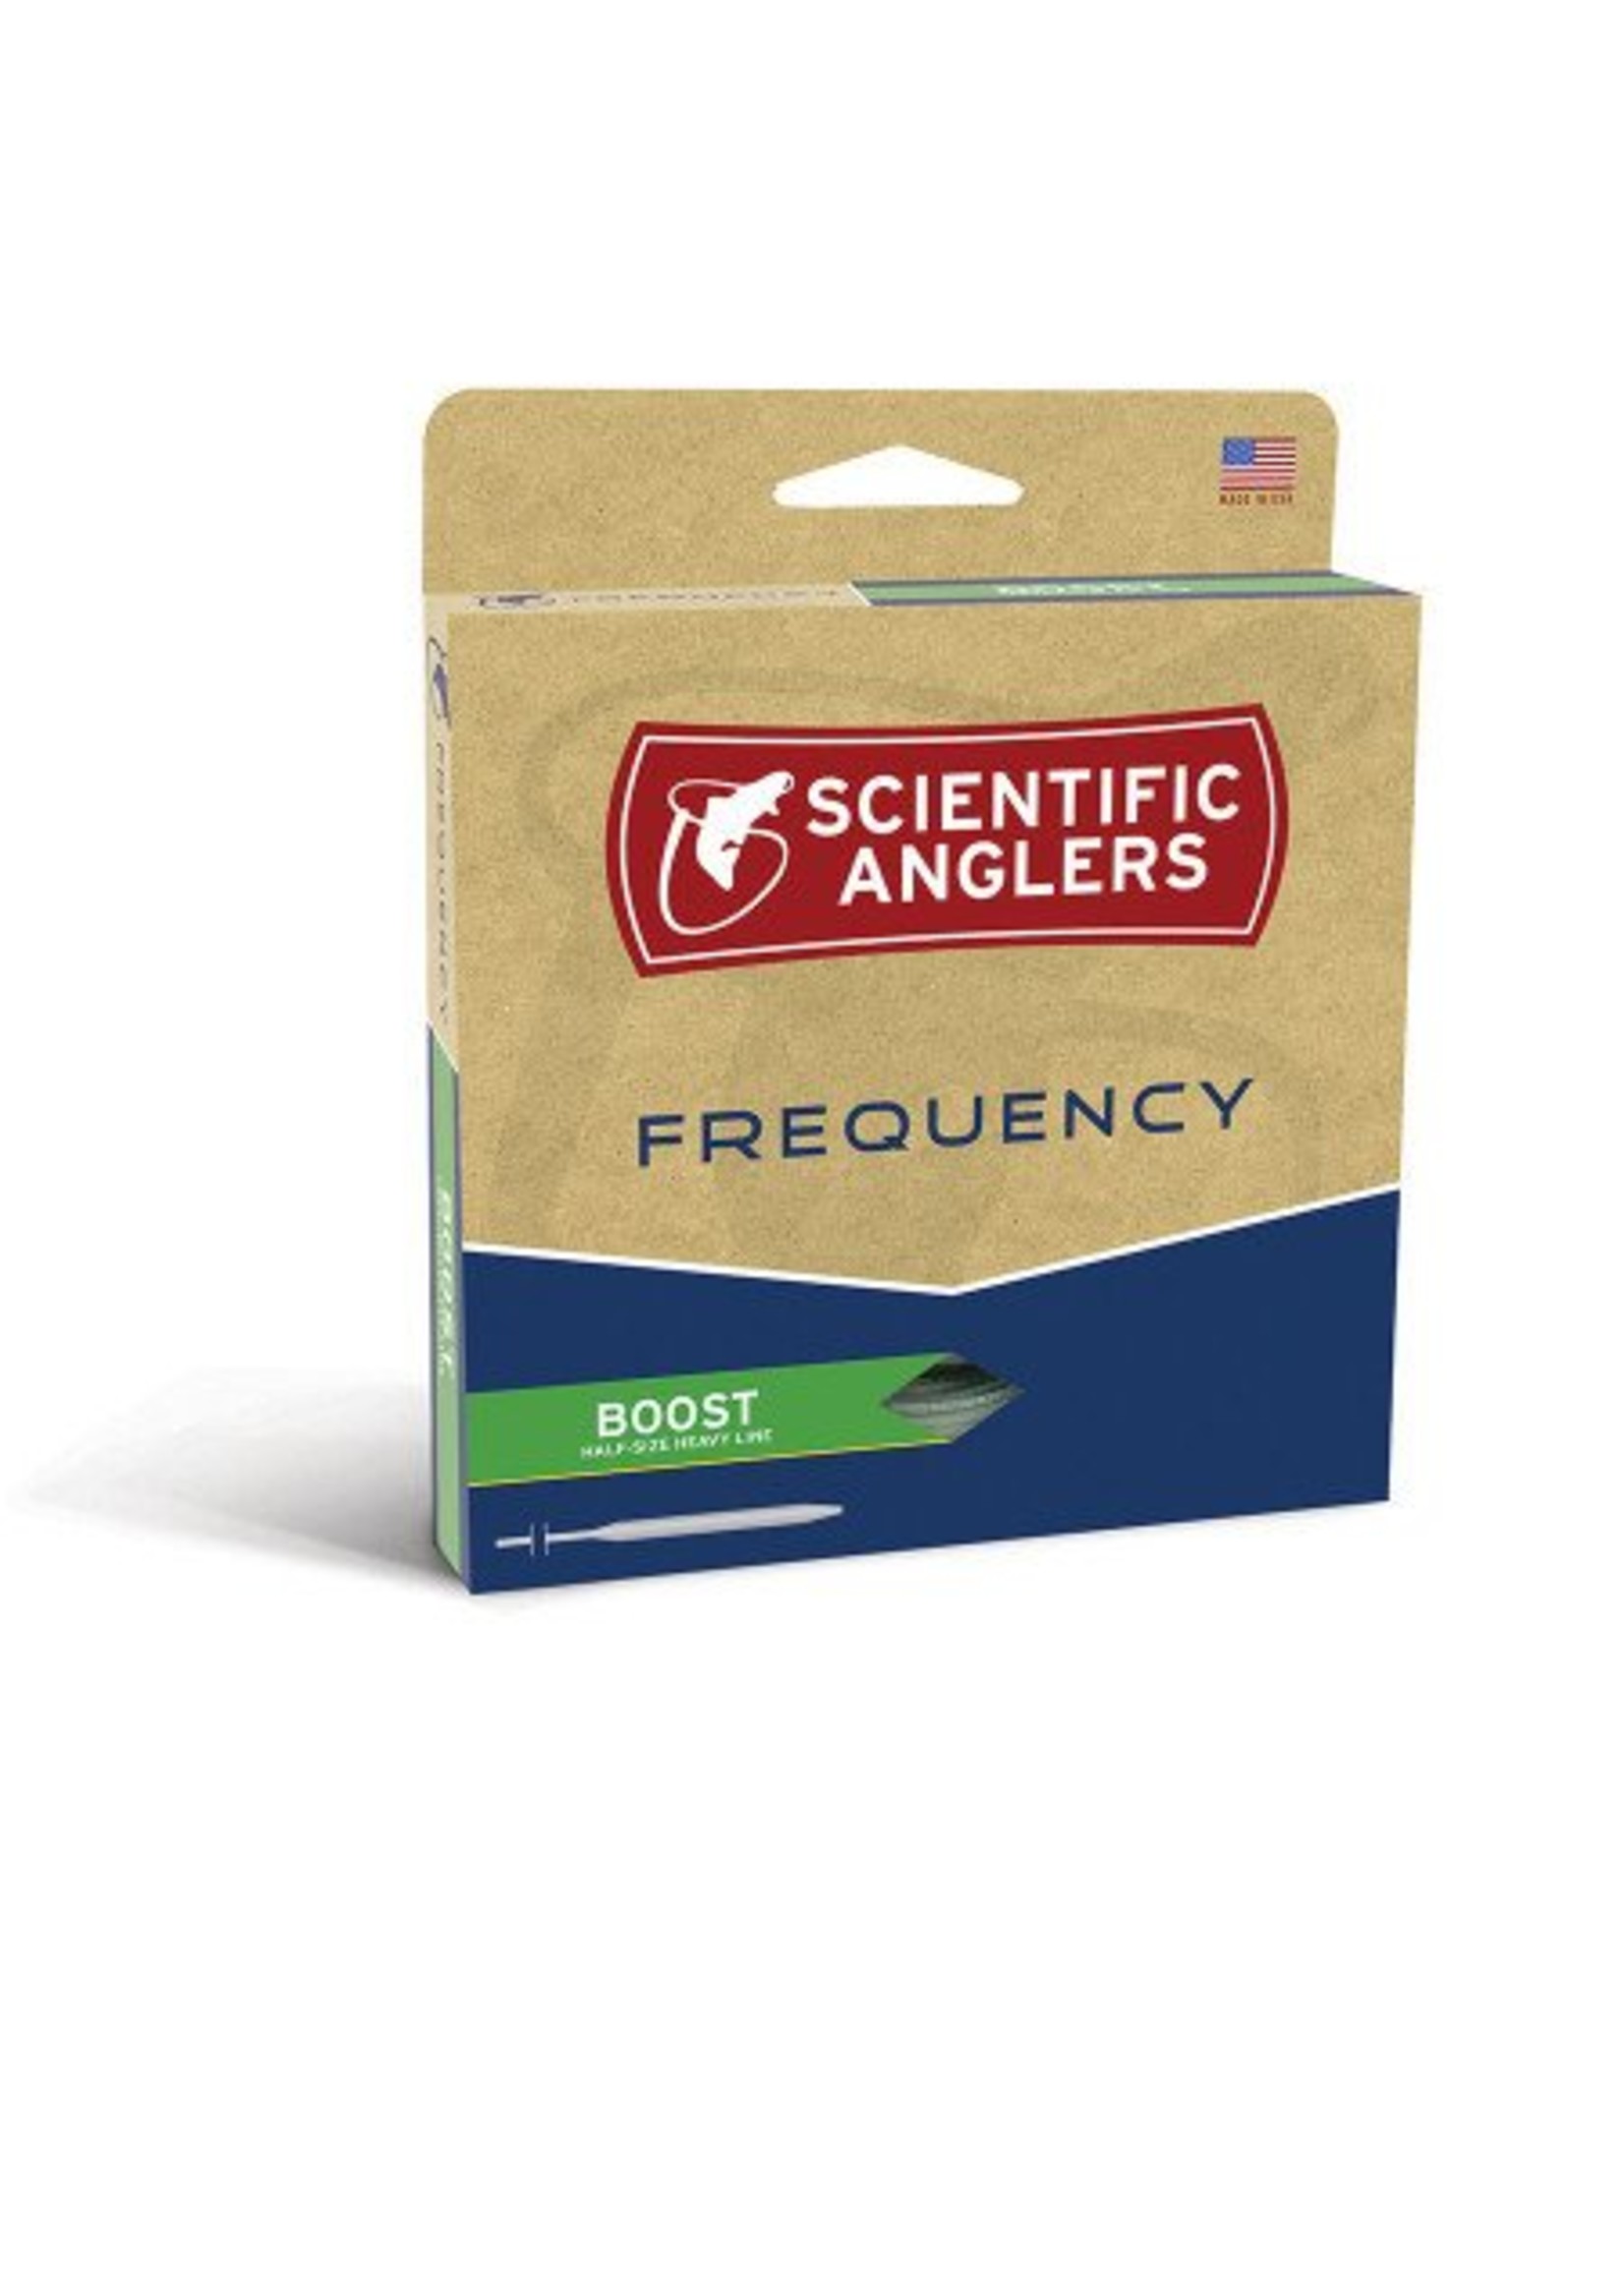 Scientific Anglers Scientific Anglers Frequency Boost Fly Line